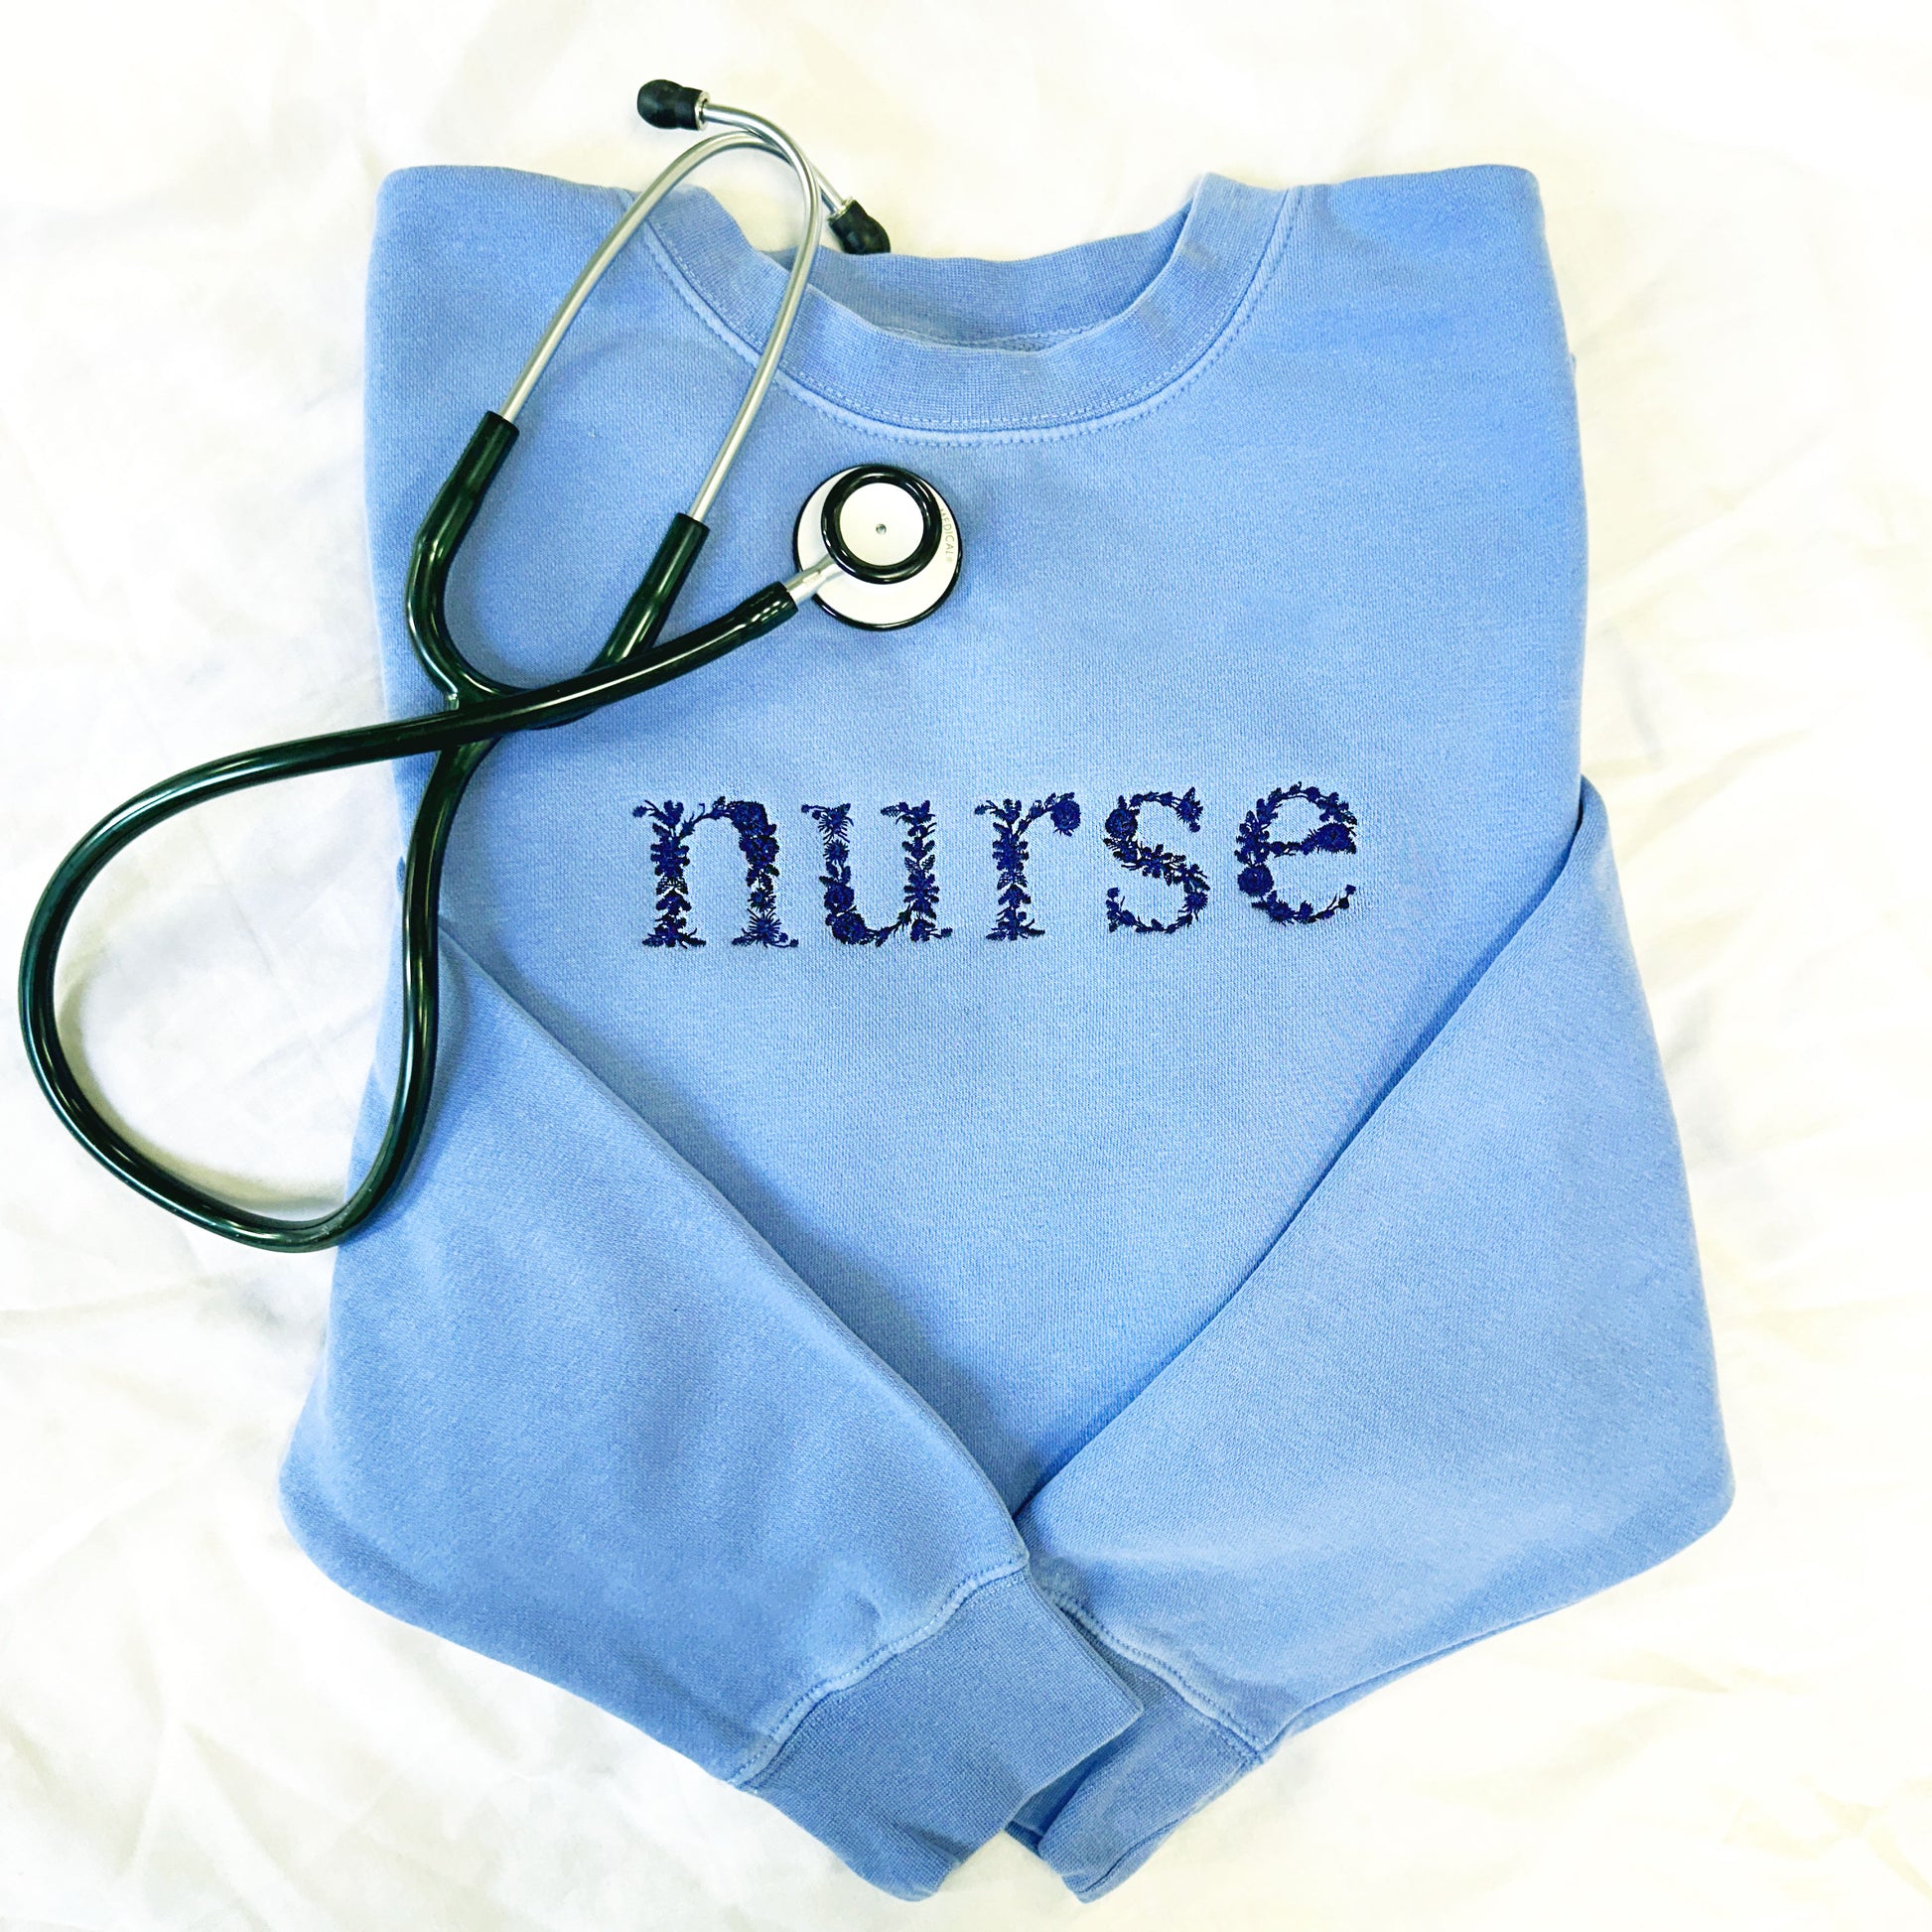 Flat lay of an embroidered nurse light blue crewneck sweatshirt with floral letters in navy